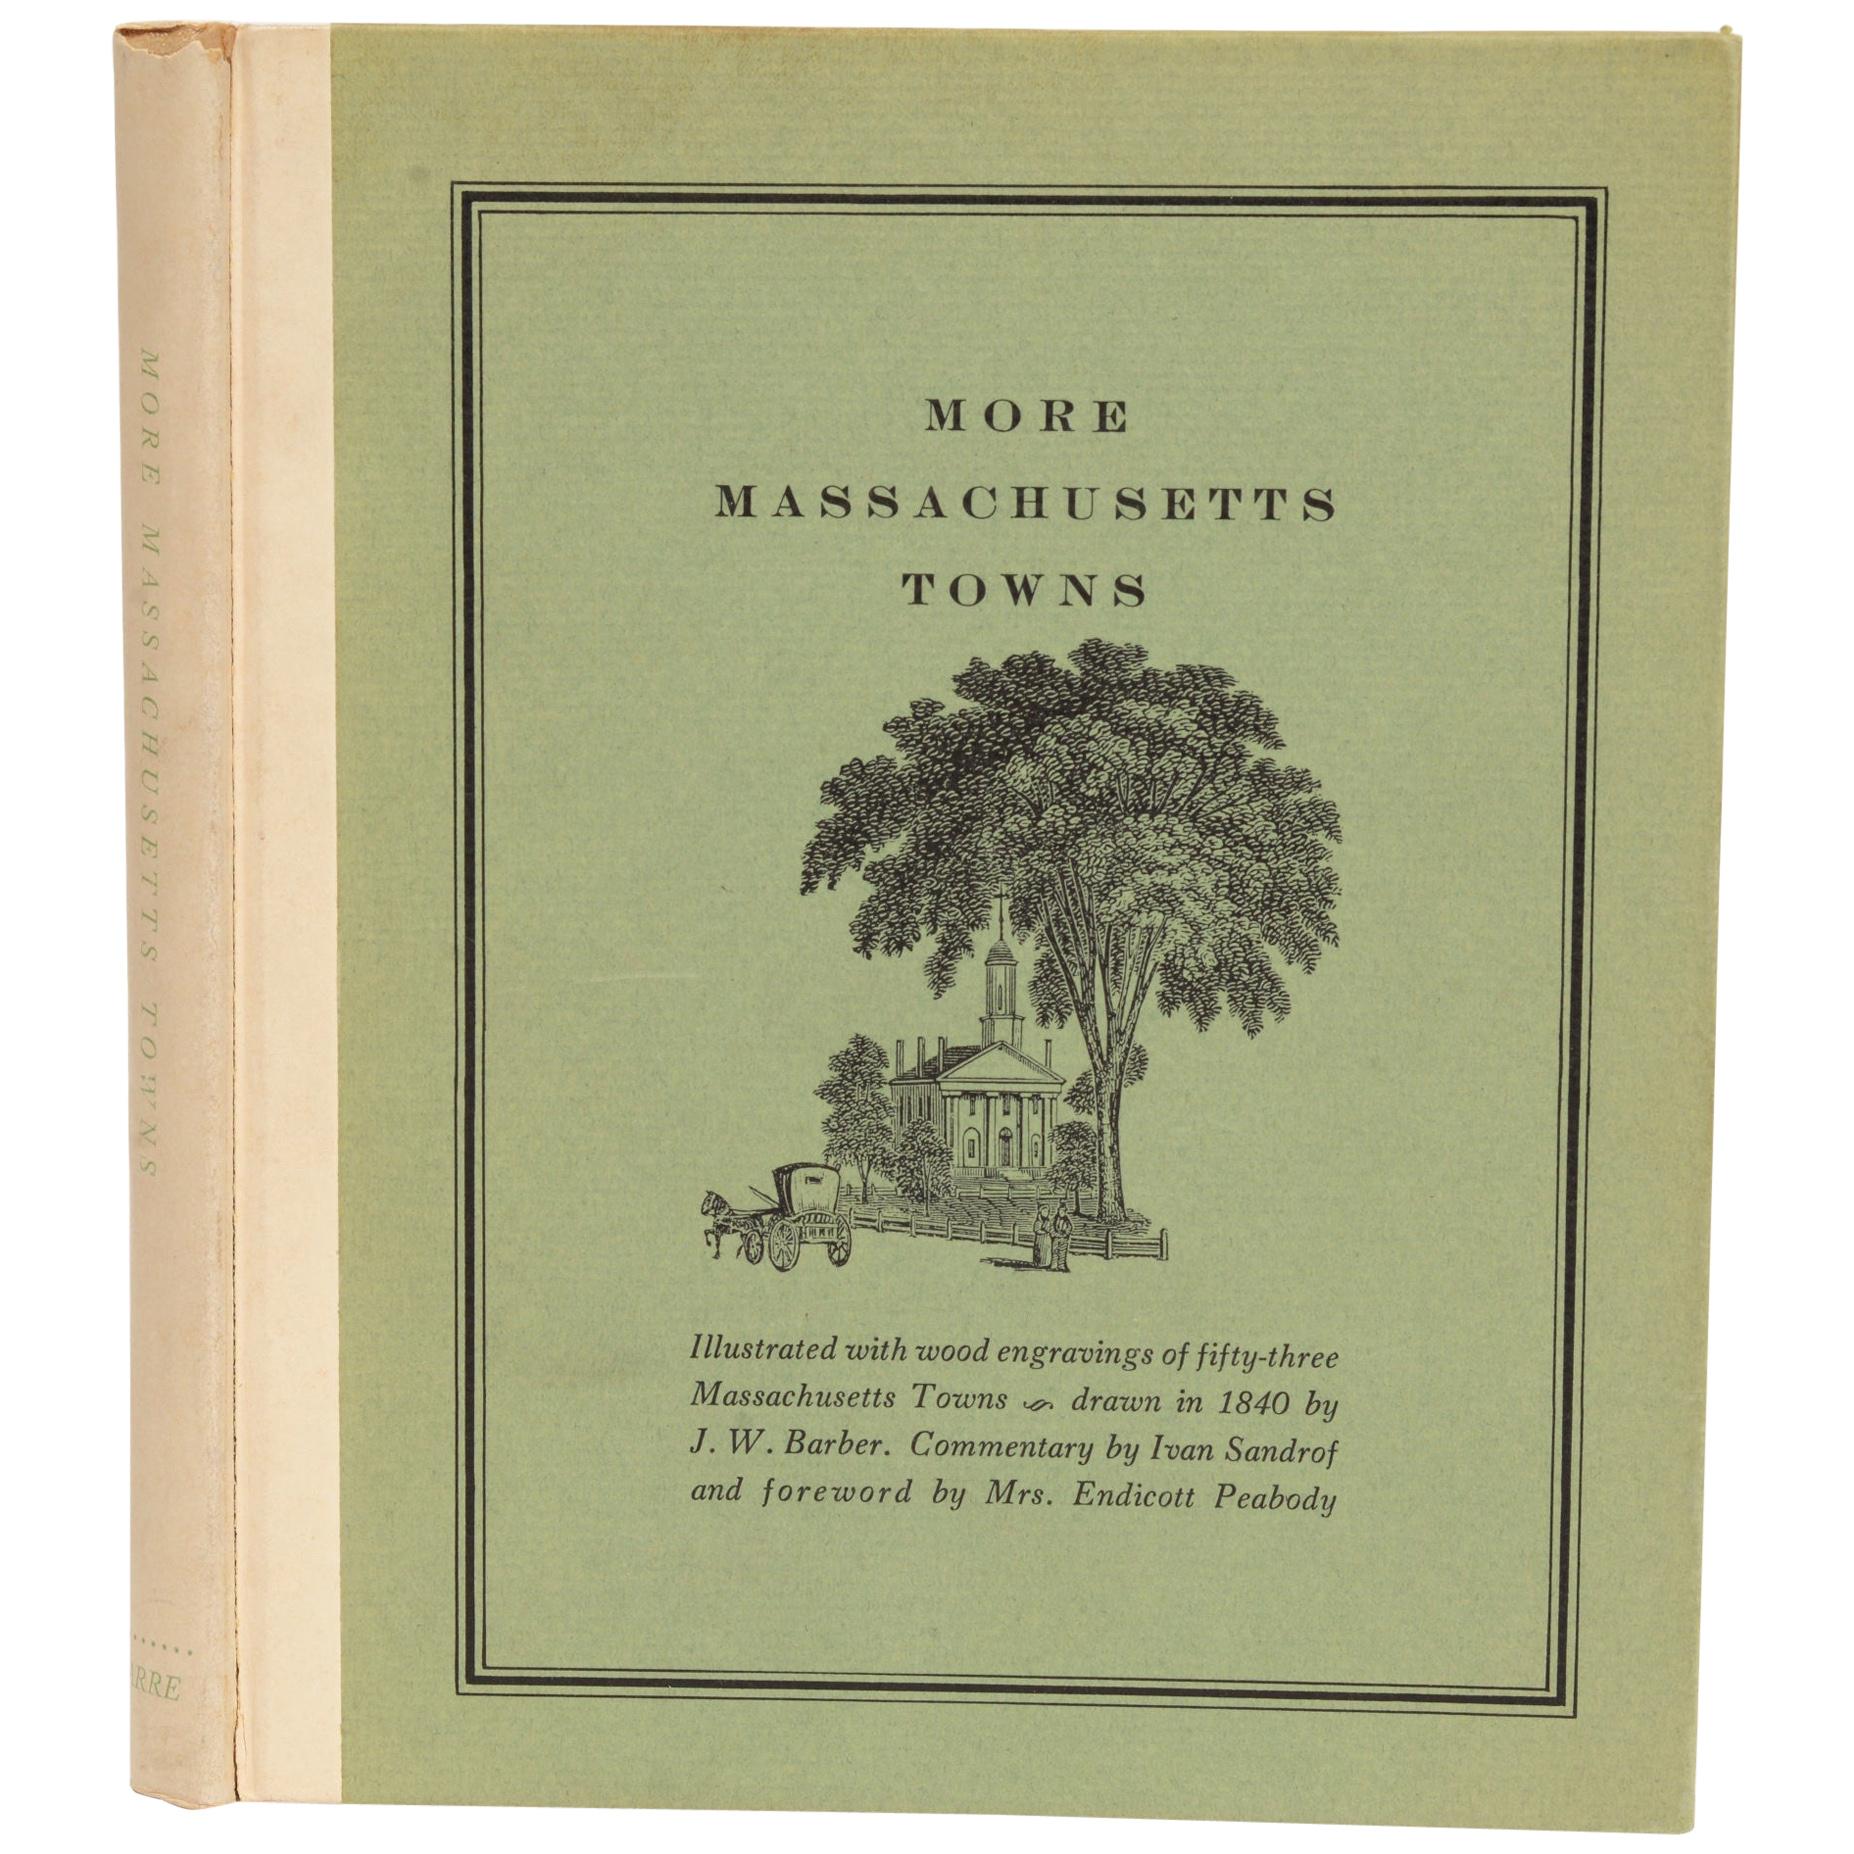 More Massachusetts Towns, Illustrated with Wood Engravings of 53 Mass. Towns For Sale